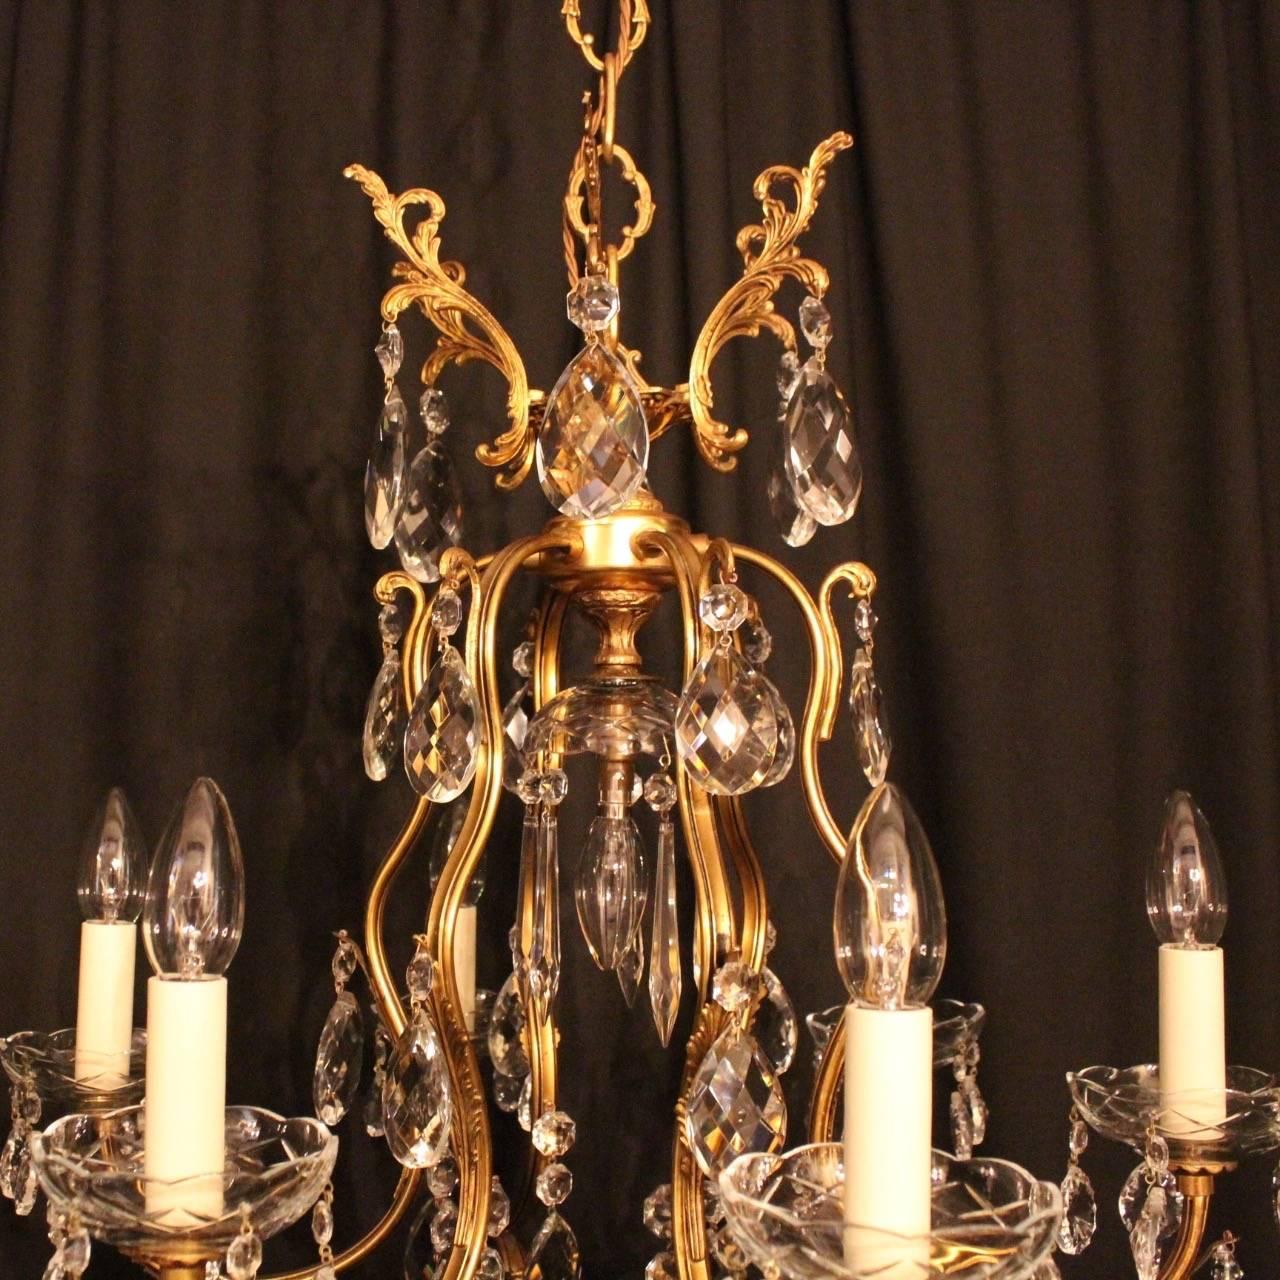 A French gilded cast brass and crystal seven-light birdcage form antique chandelier, the six acanthus leaf scrolling arms with glass bobeche drip pans, issuing from a cage form interior with a single inverted light fitting and large central